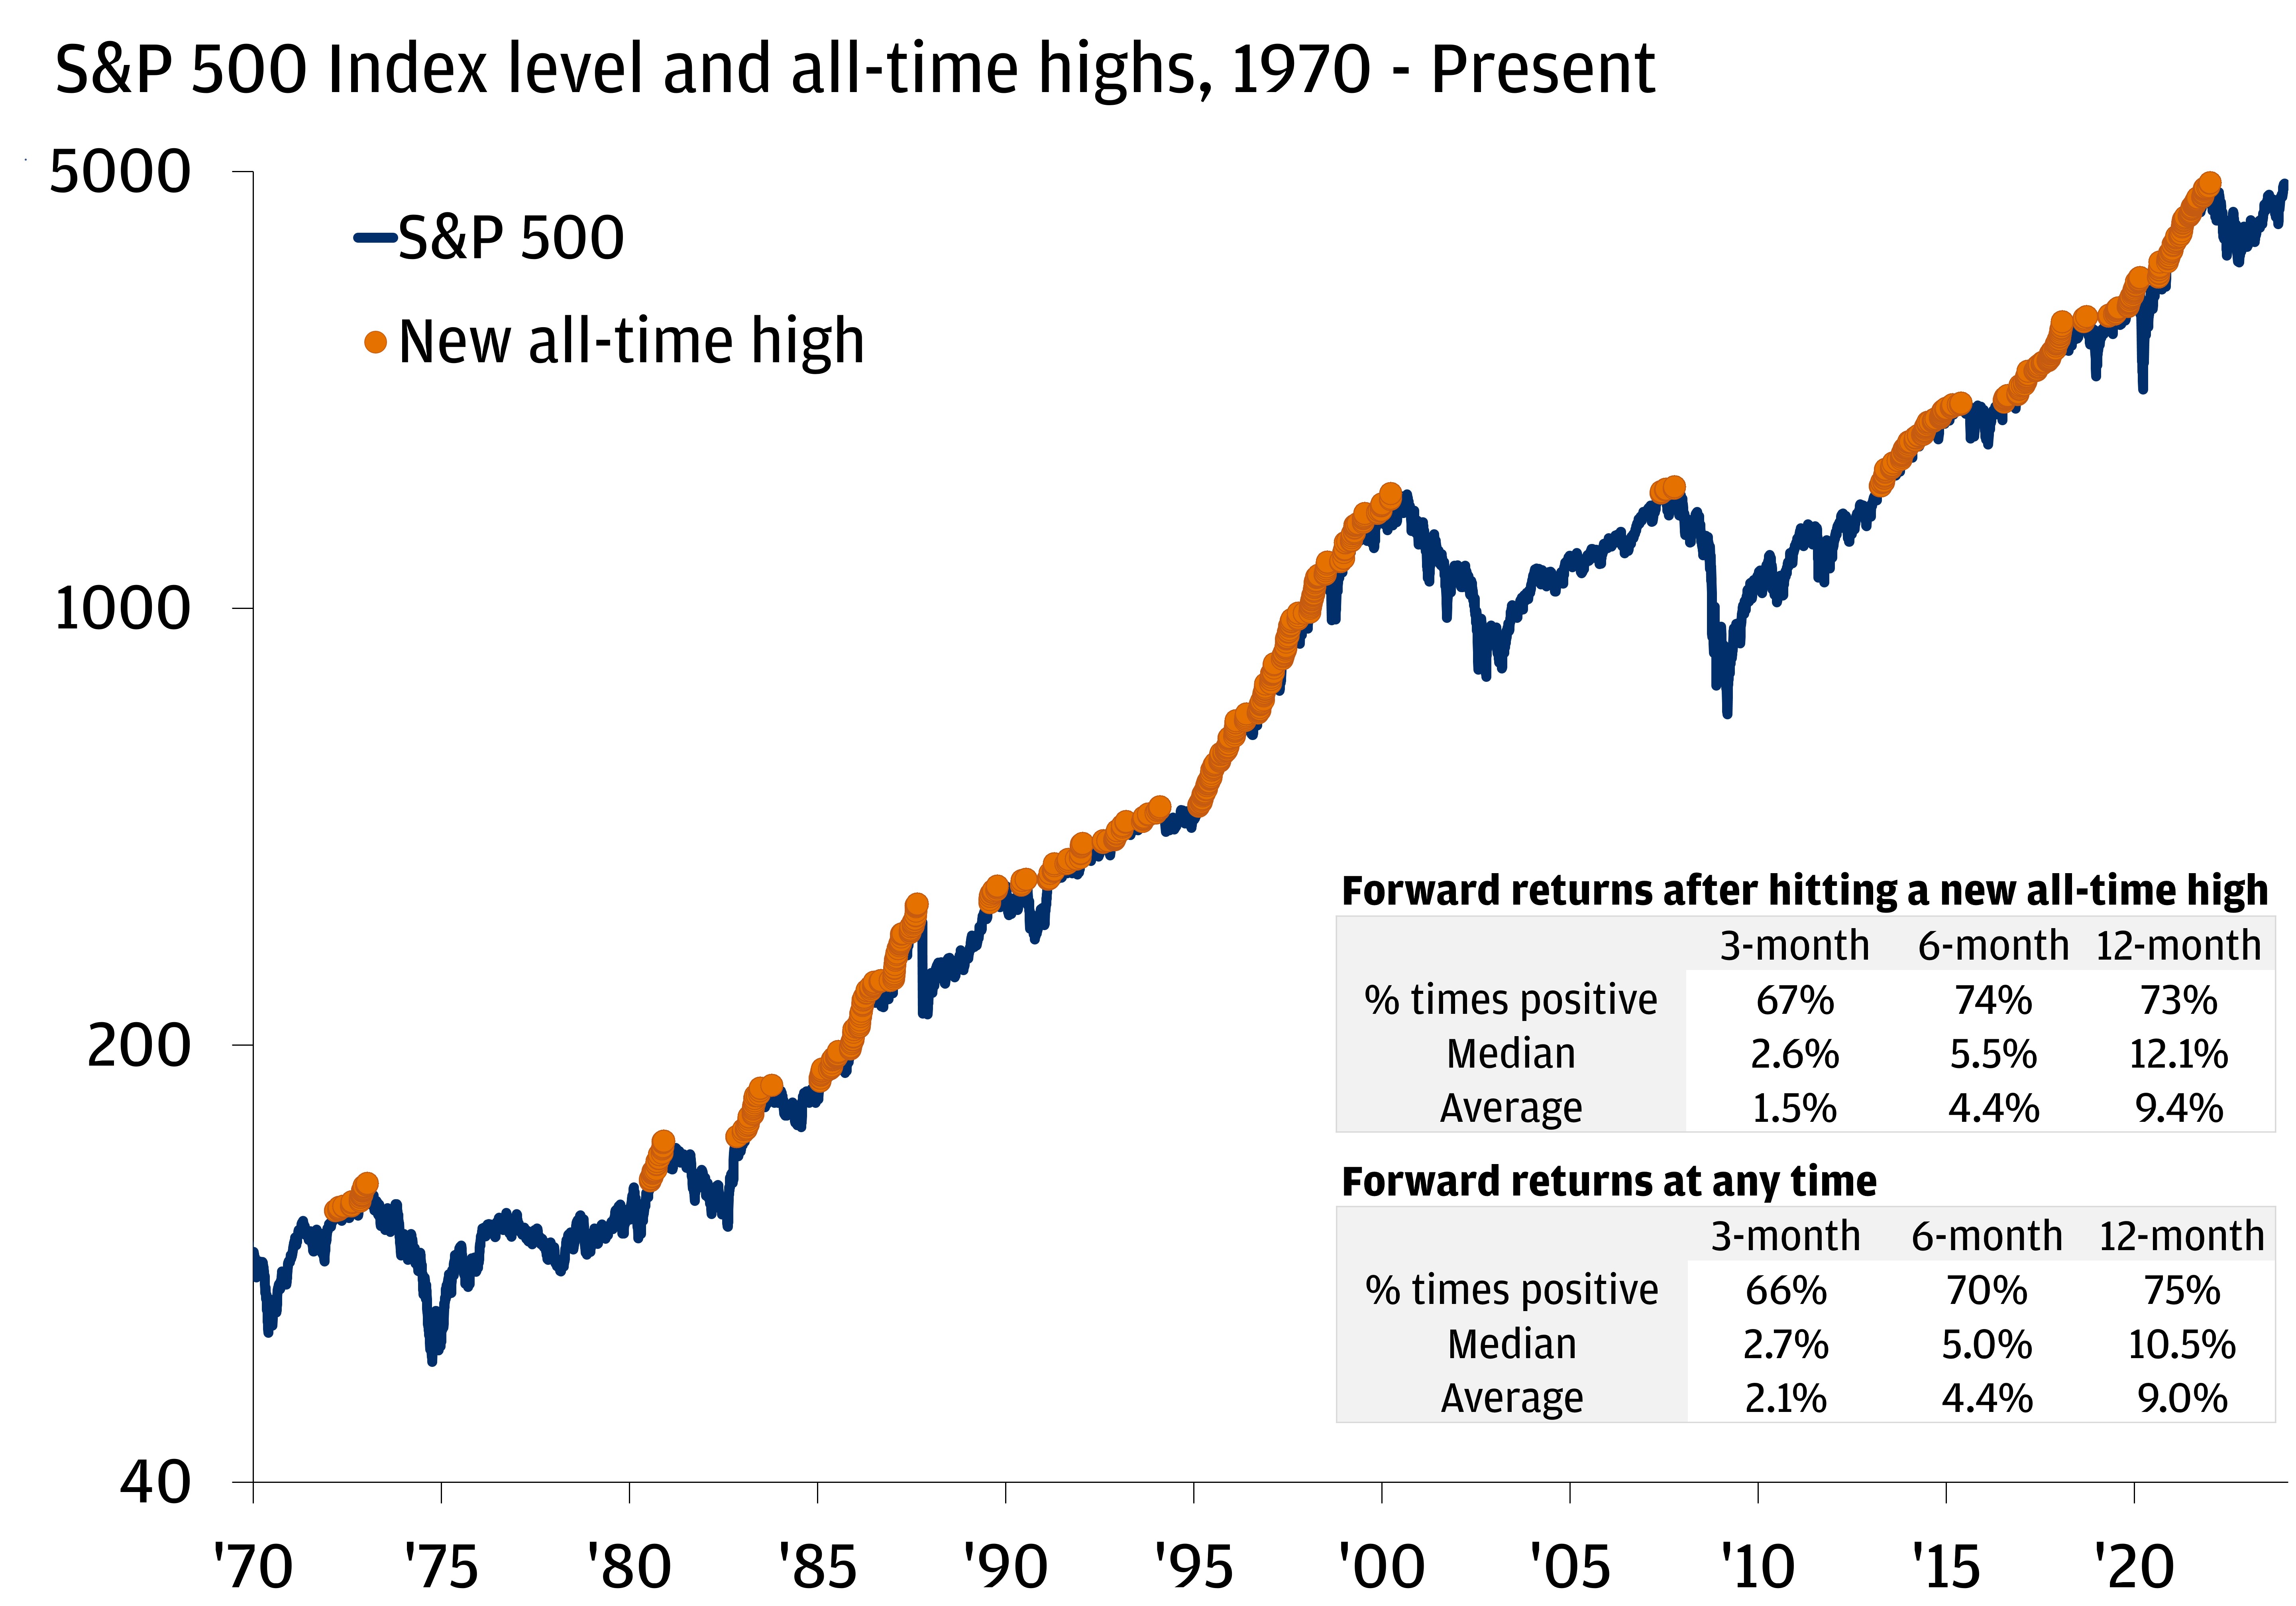 S&P 500 index level and all time highs 1970 to present